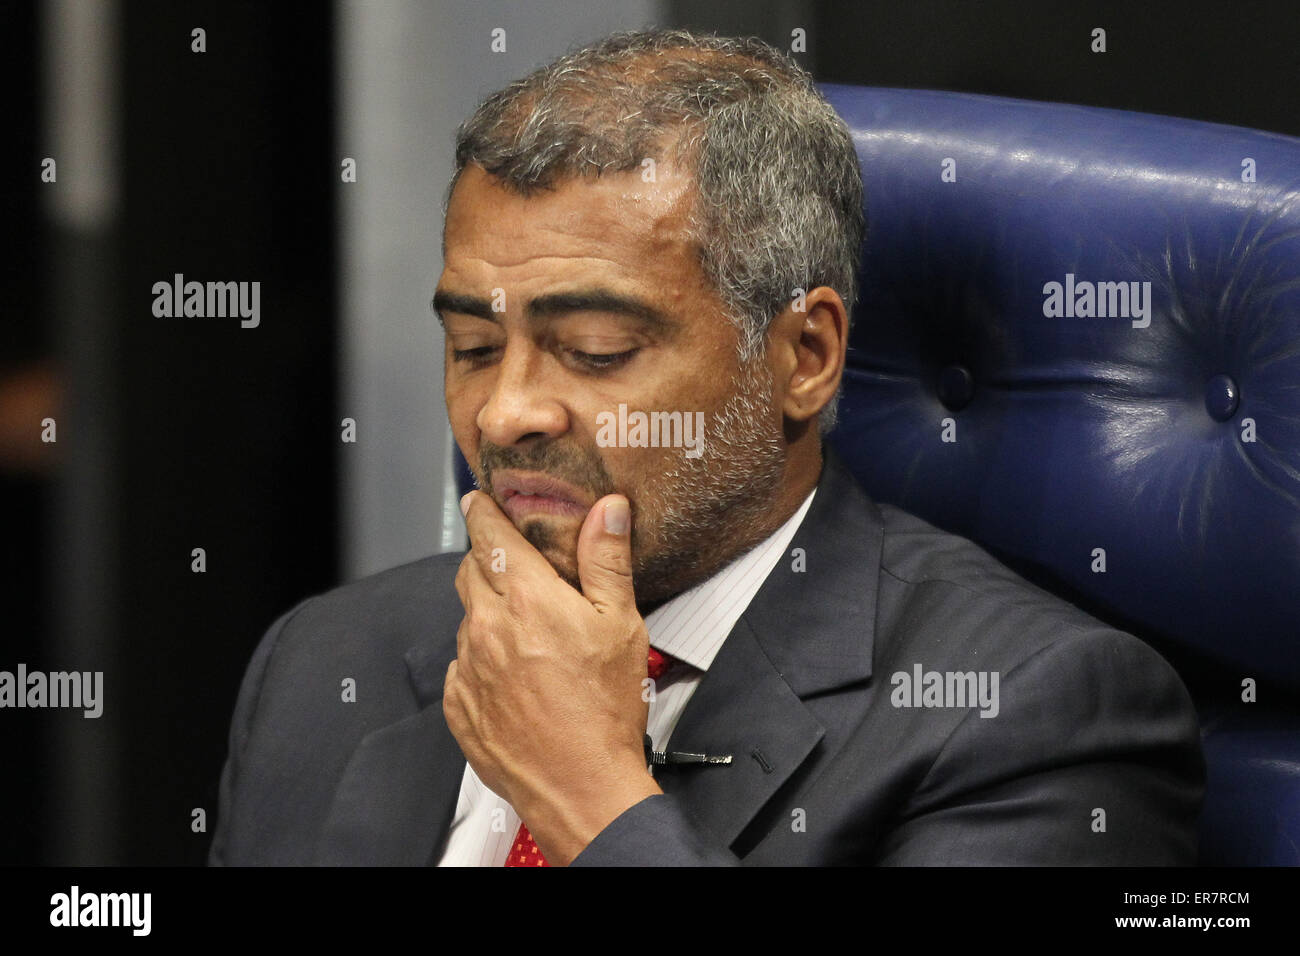 Brasilia, Brazil. 28th May, 2015. The senator and former Brazilian player Romario reacts during a plenary session of the Senate in Brasilia, Brazil, on May 28, 2015. The Brazilian Senate on Thursday approved the request made by former soccer star and now Senator Romario for the creation of a congressional panel to investigate corruption in soccer. Credit:  Dida Sampaio/AGENCIA ESTADO/Xinhua/Alamy Live News Stock Photo